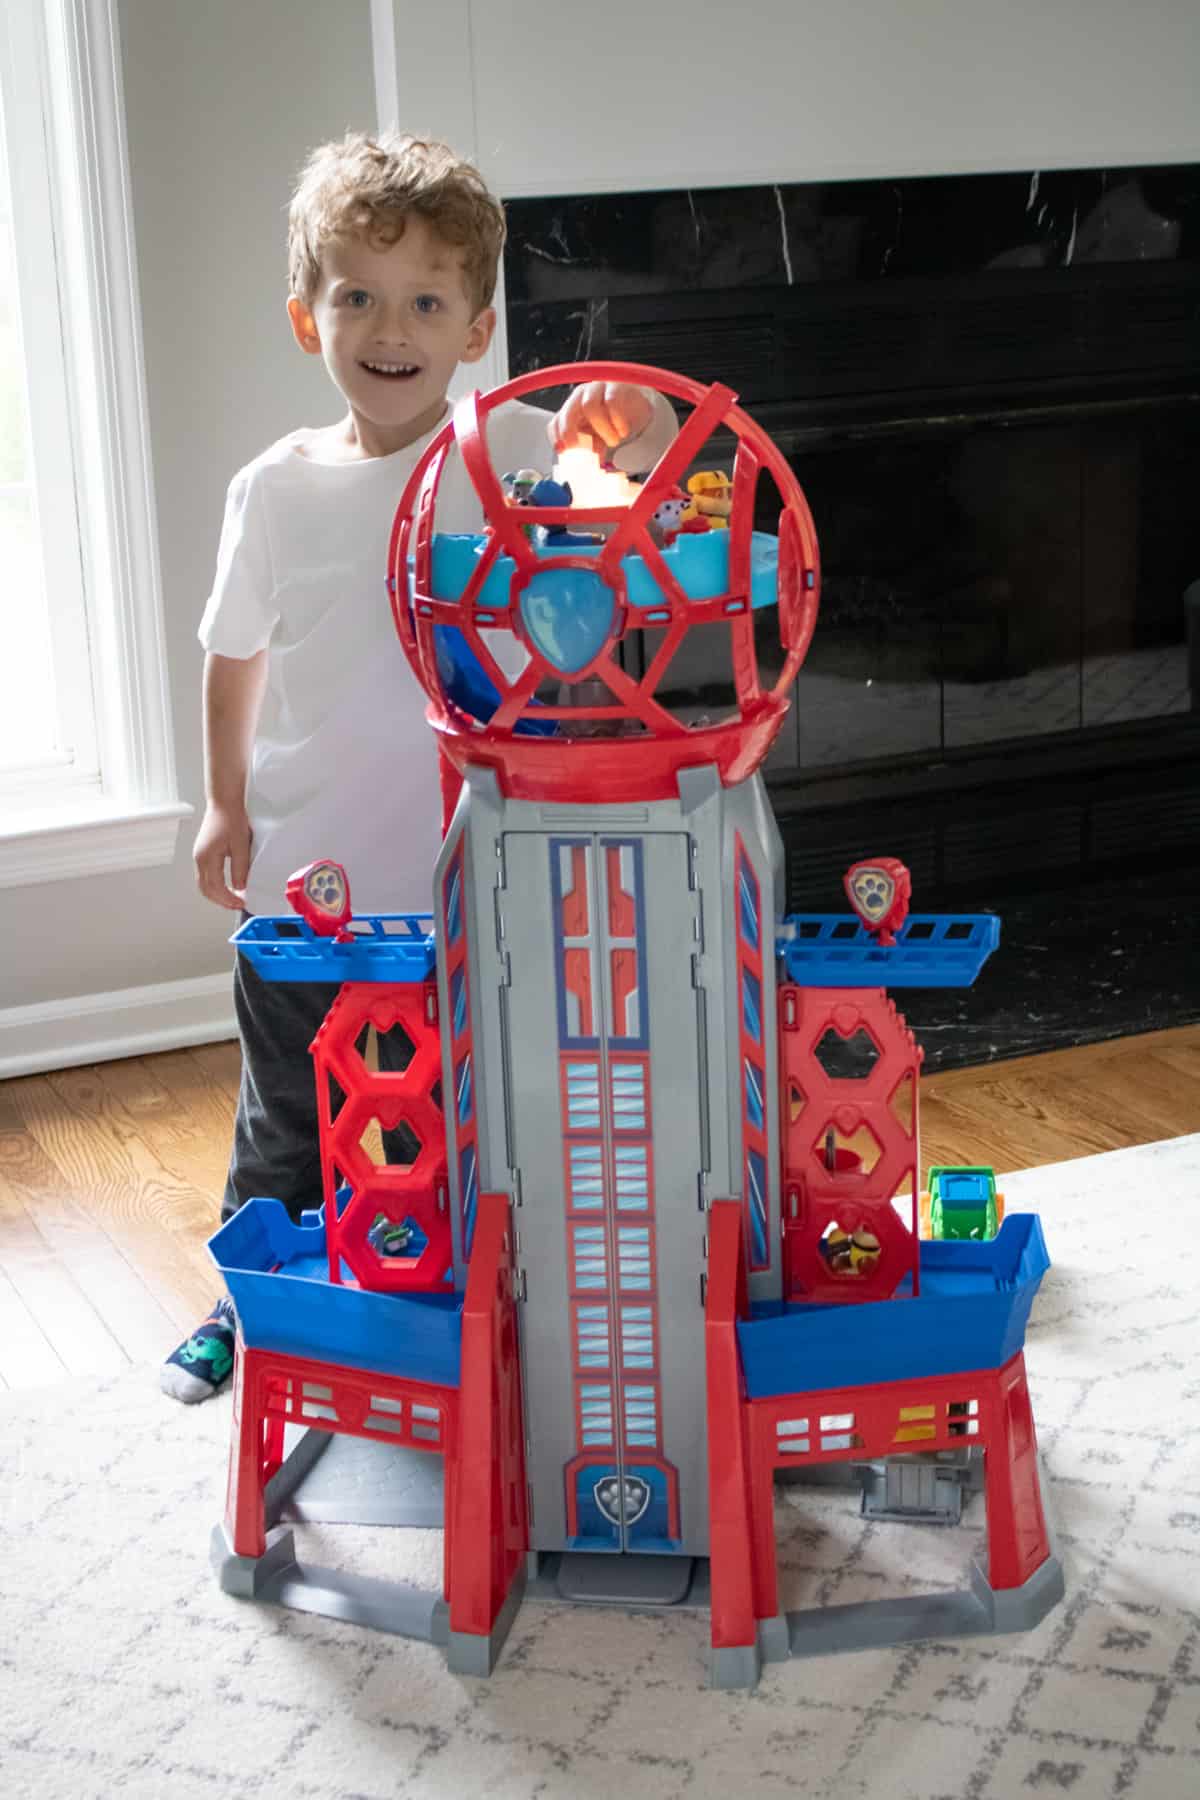 Young boy excited and smiling behind the The Ultimate City Tower Playset